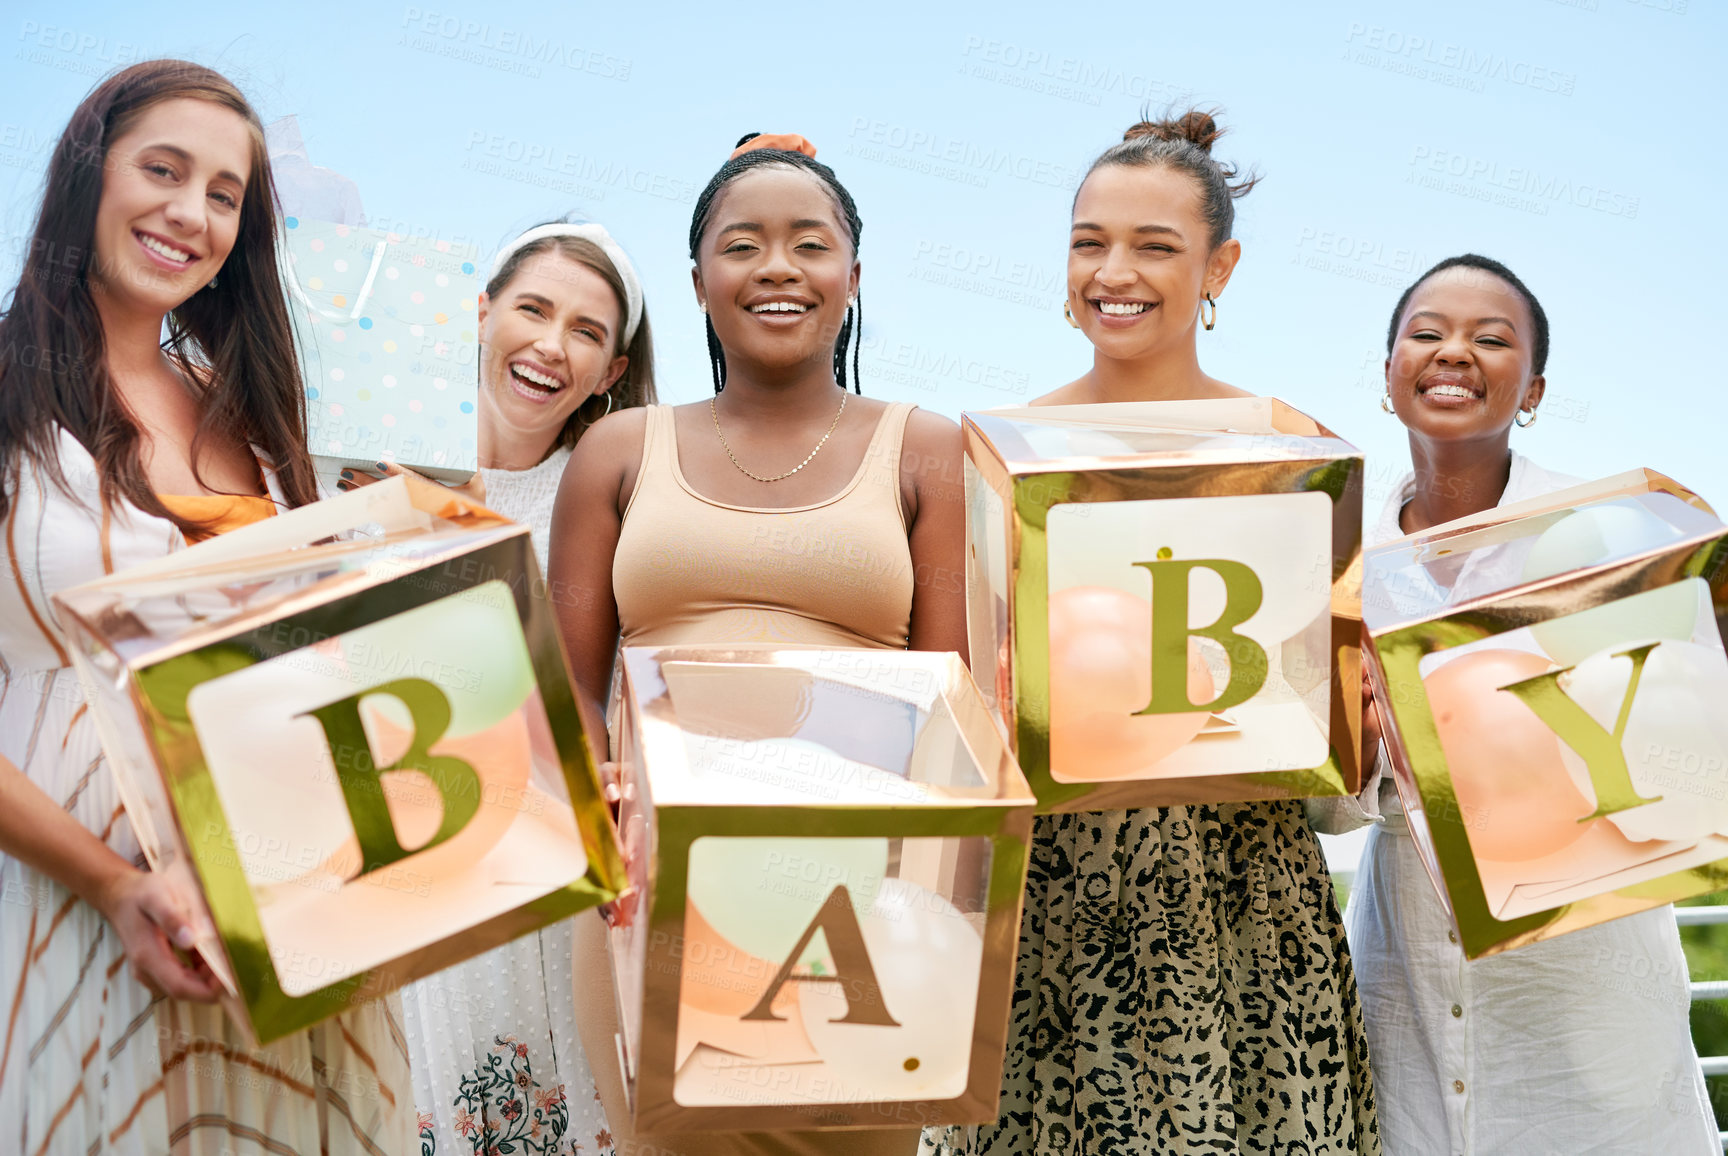 Buy stock photo Shot of a group of women holding a sign at a friends baby shower